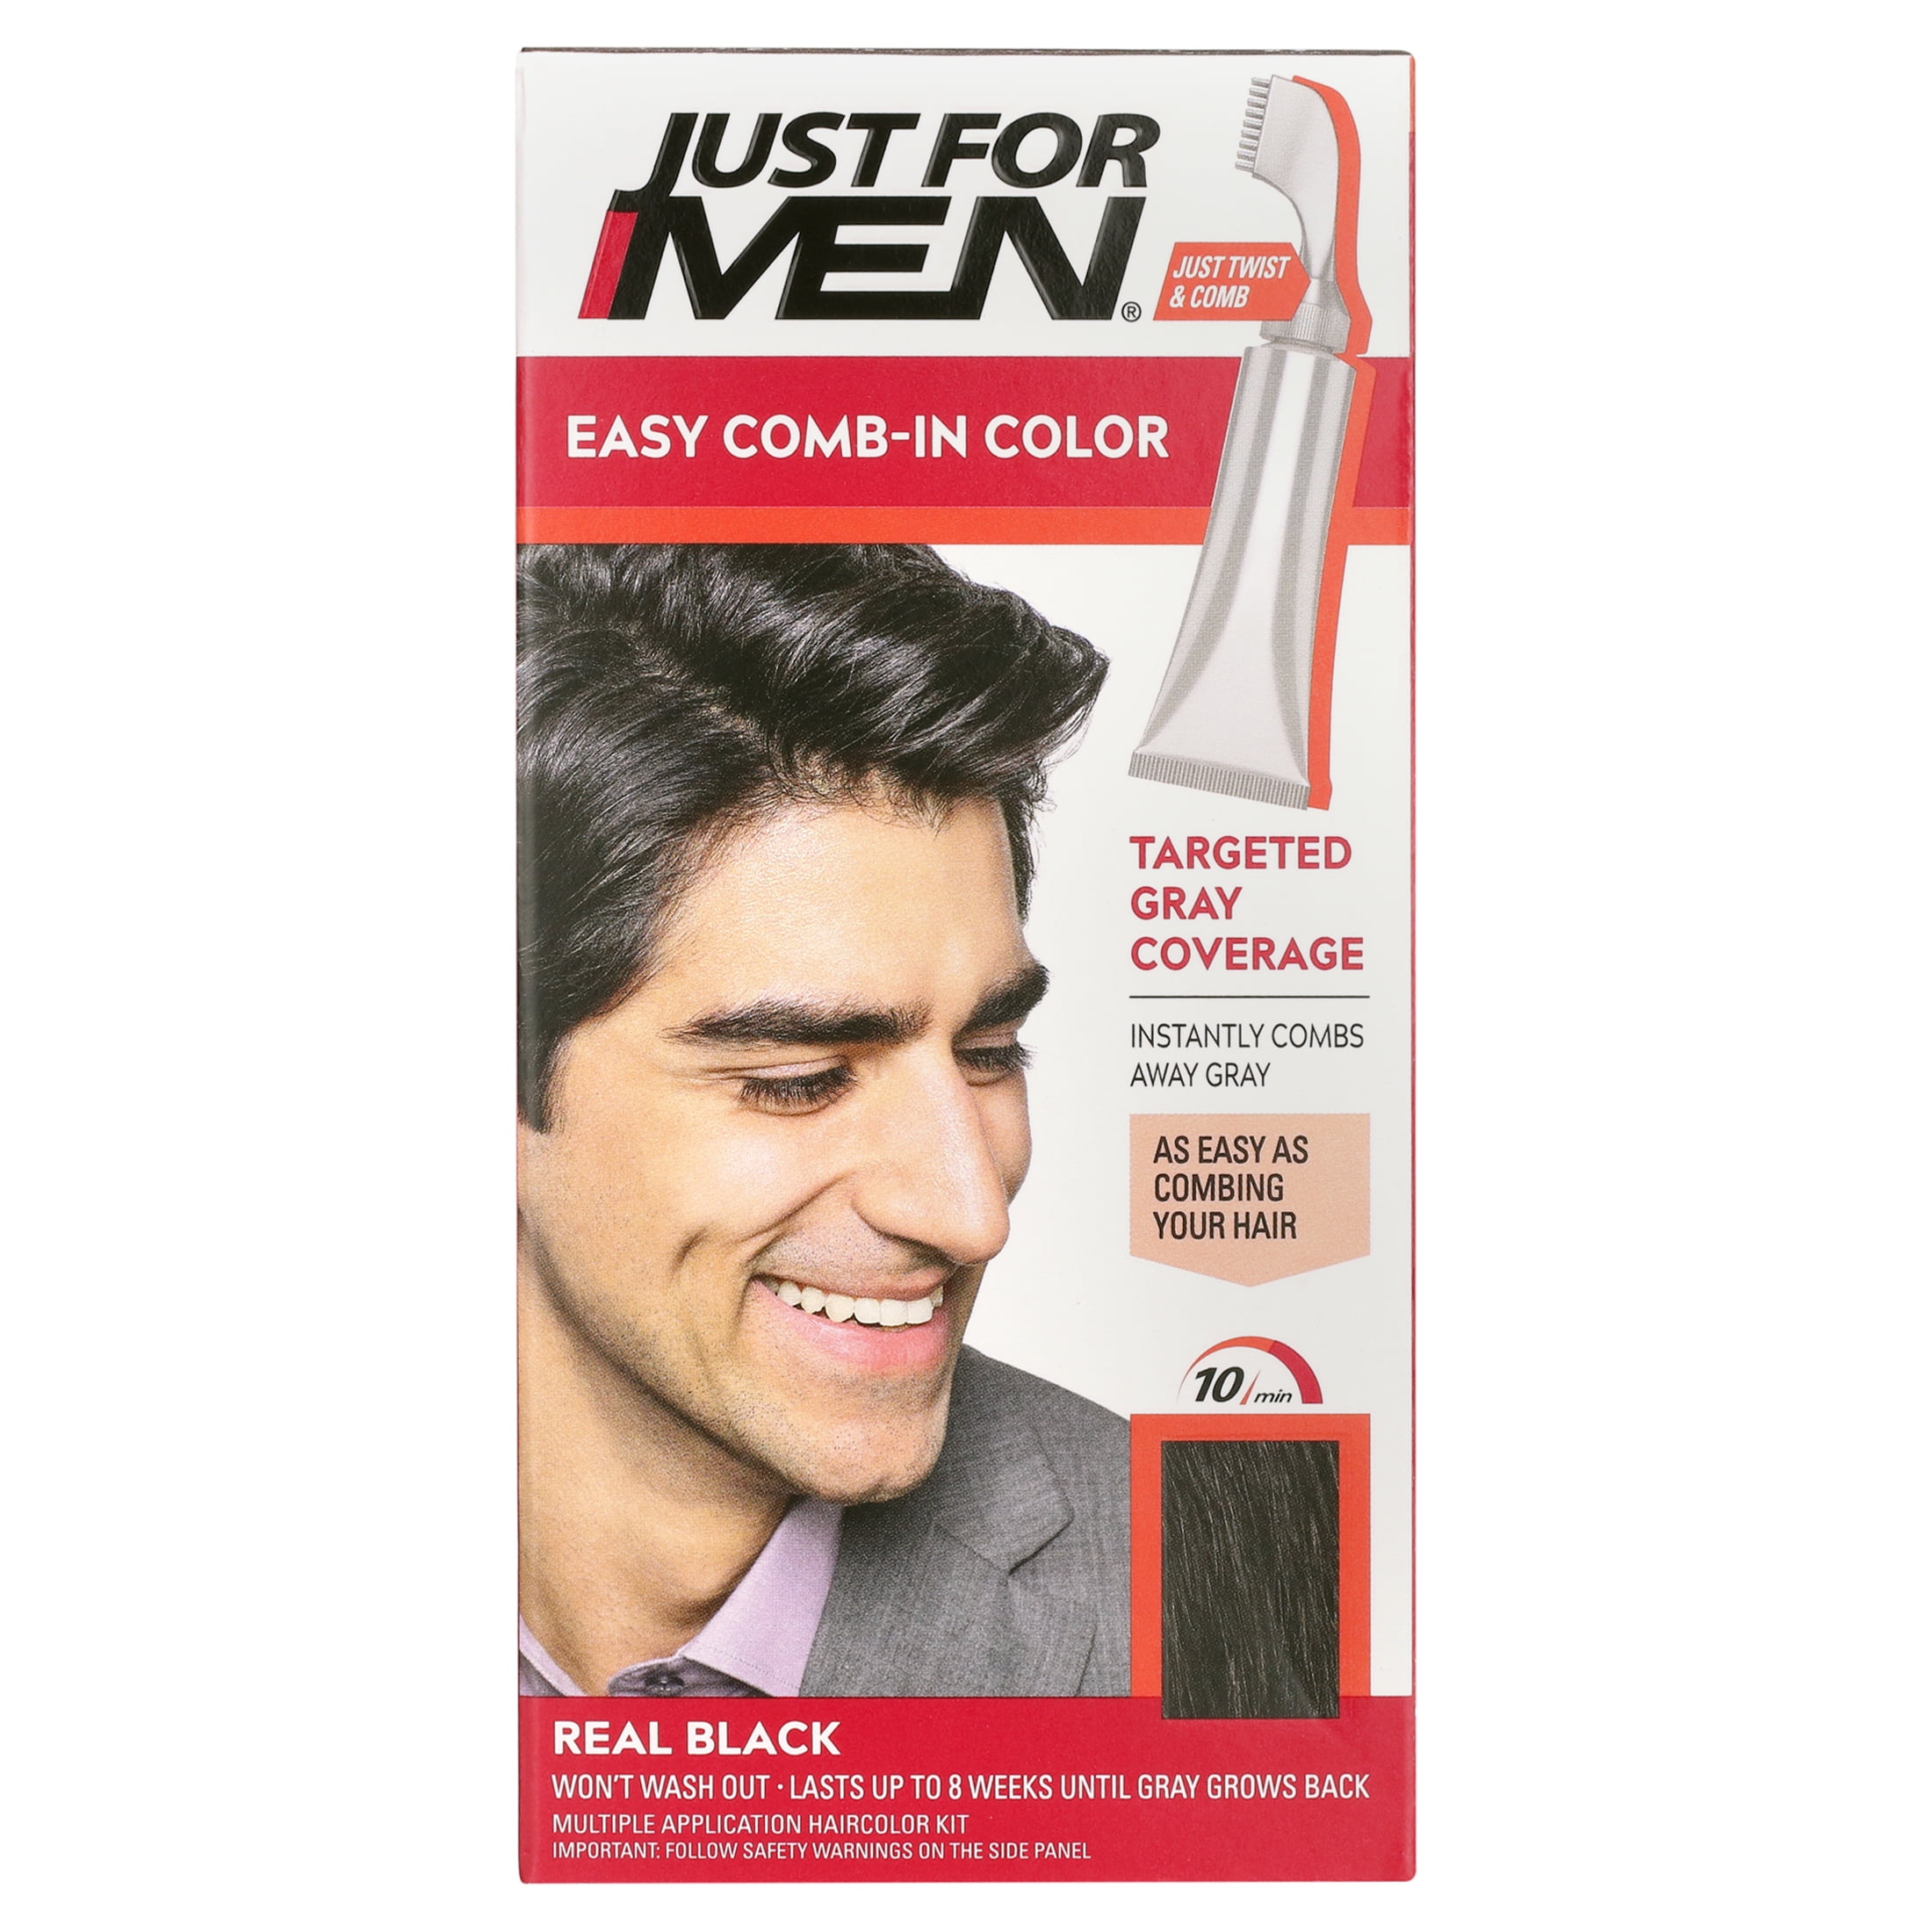 Just For Men Easy Comb-In Color, Real Black A-55 - 1 kit